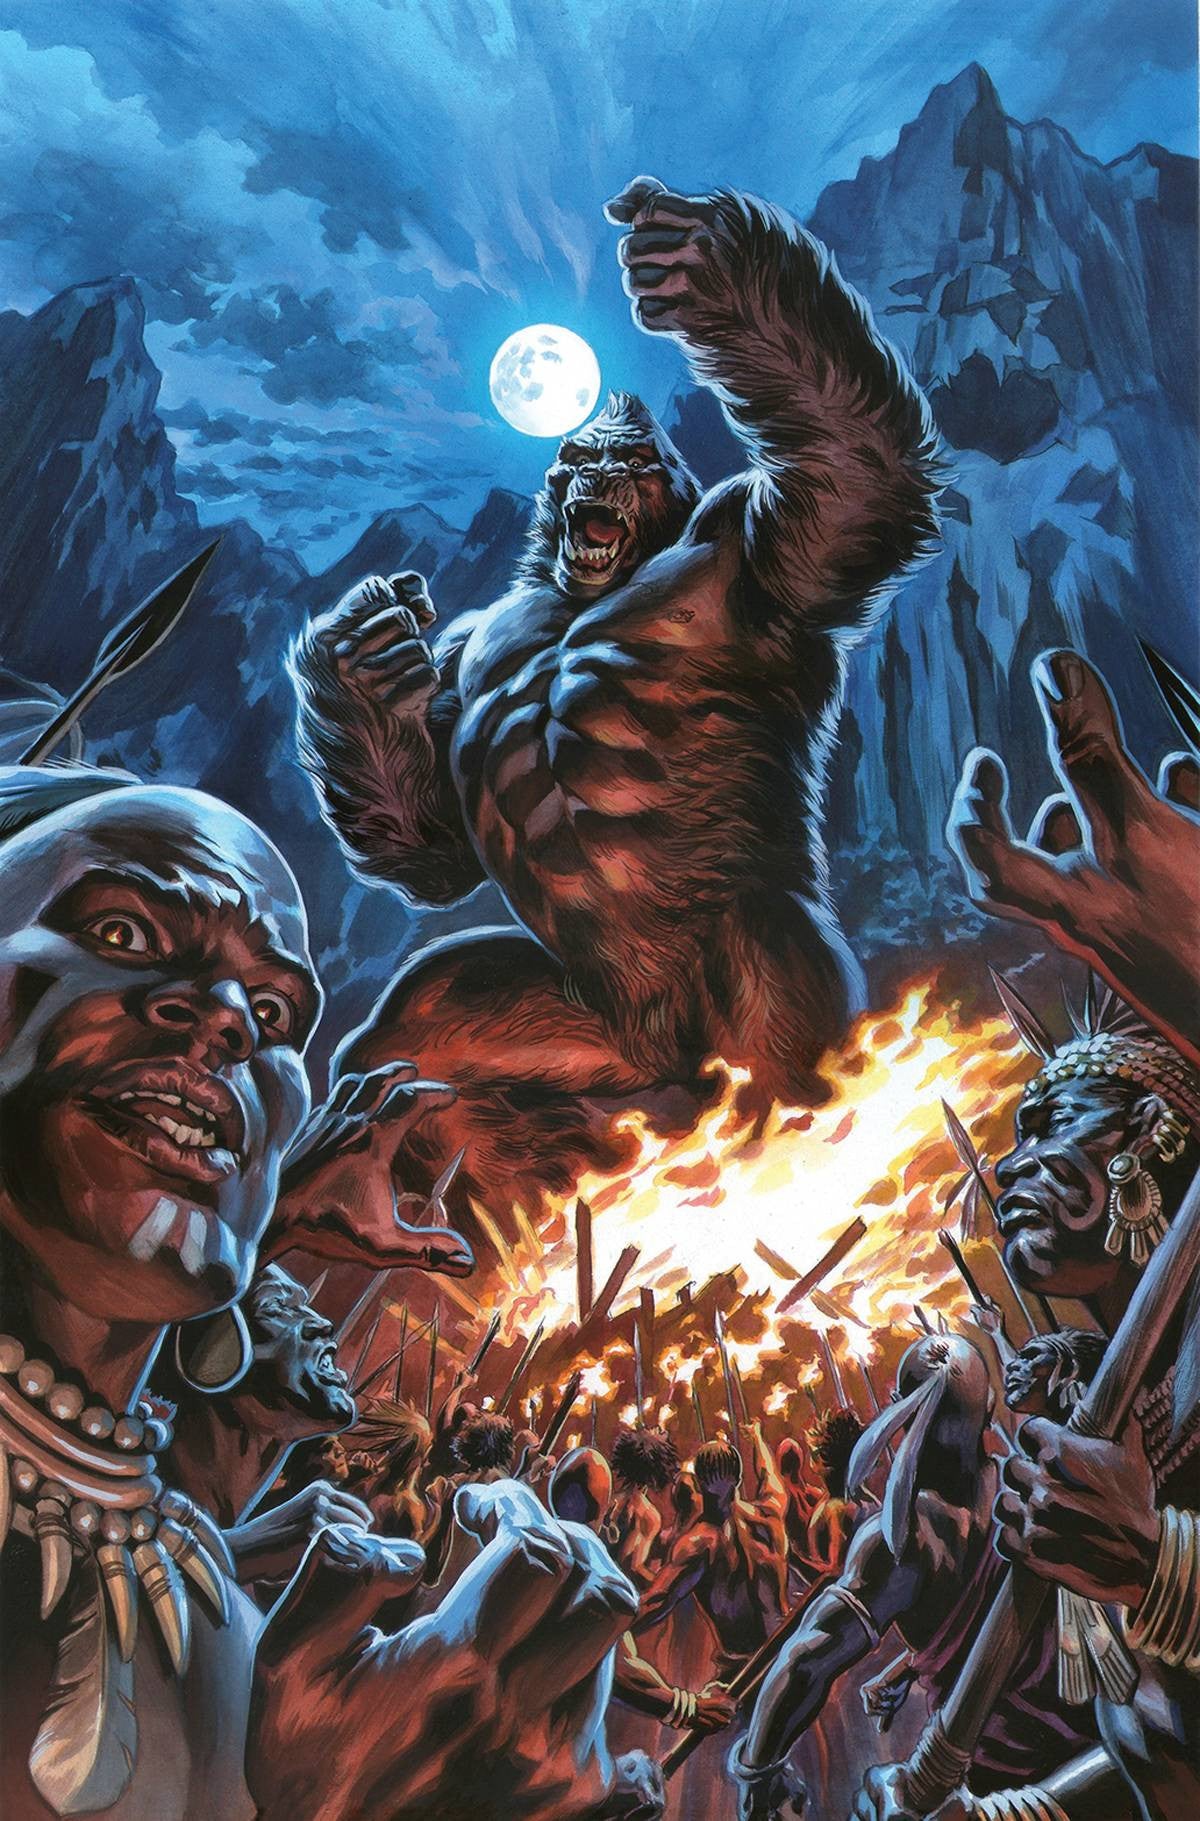 KONG OF SKULL ISLAND #1 (OF 6) COVER